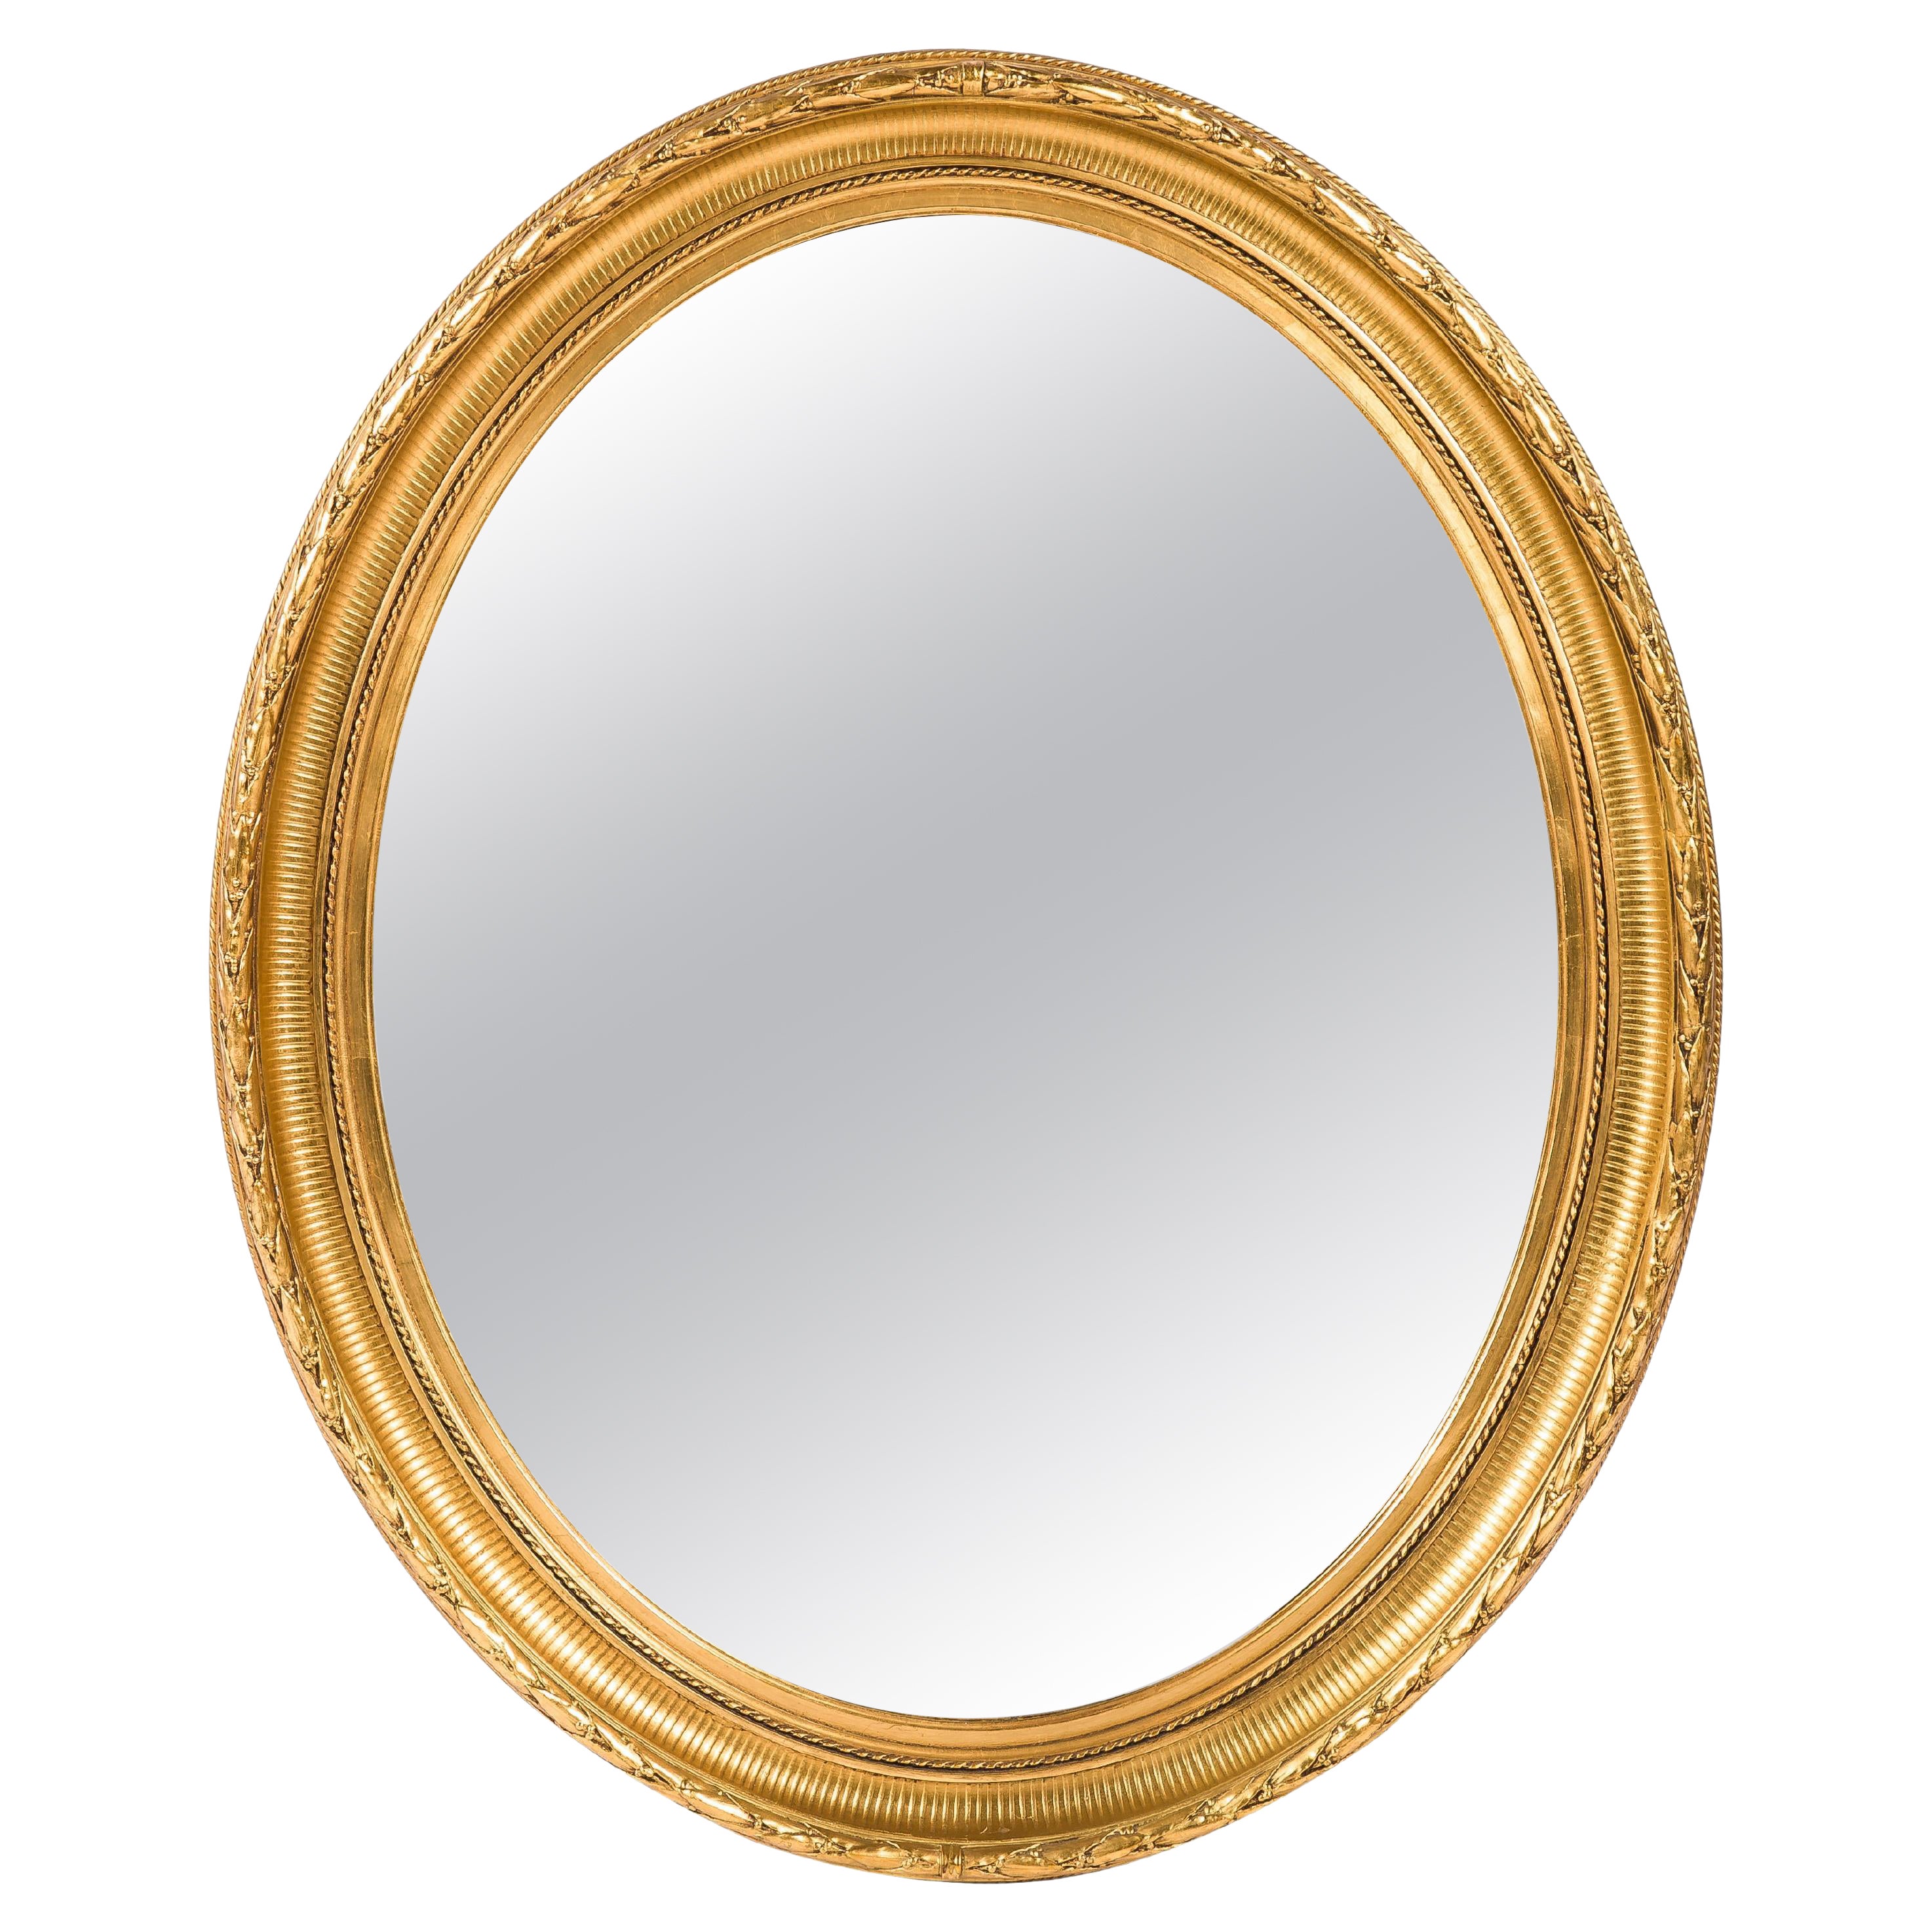 Antique 19th Century French Oval Gold Leaf Gilt Louis Seize or Empire Mirror For Sale